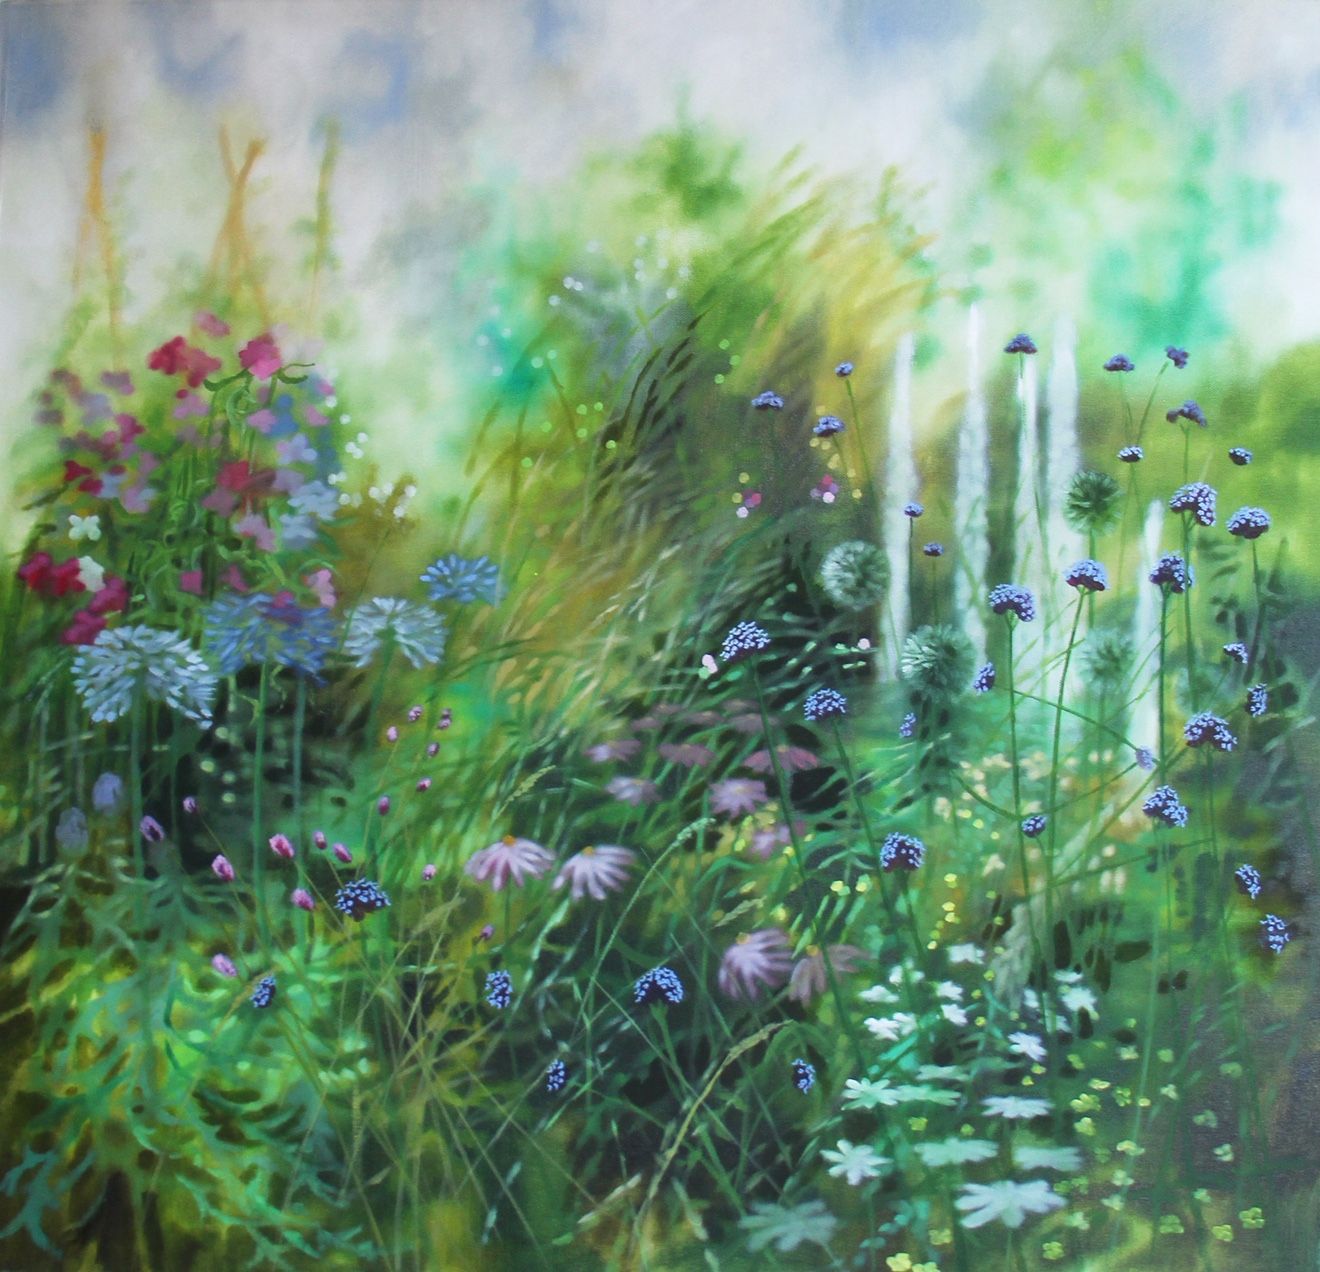 Dorset Garden with Sweet Peas, by Dylan Lloyd